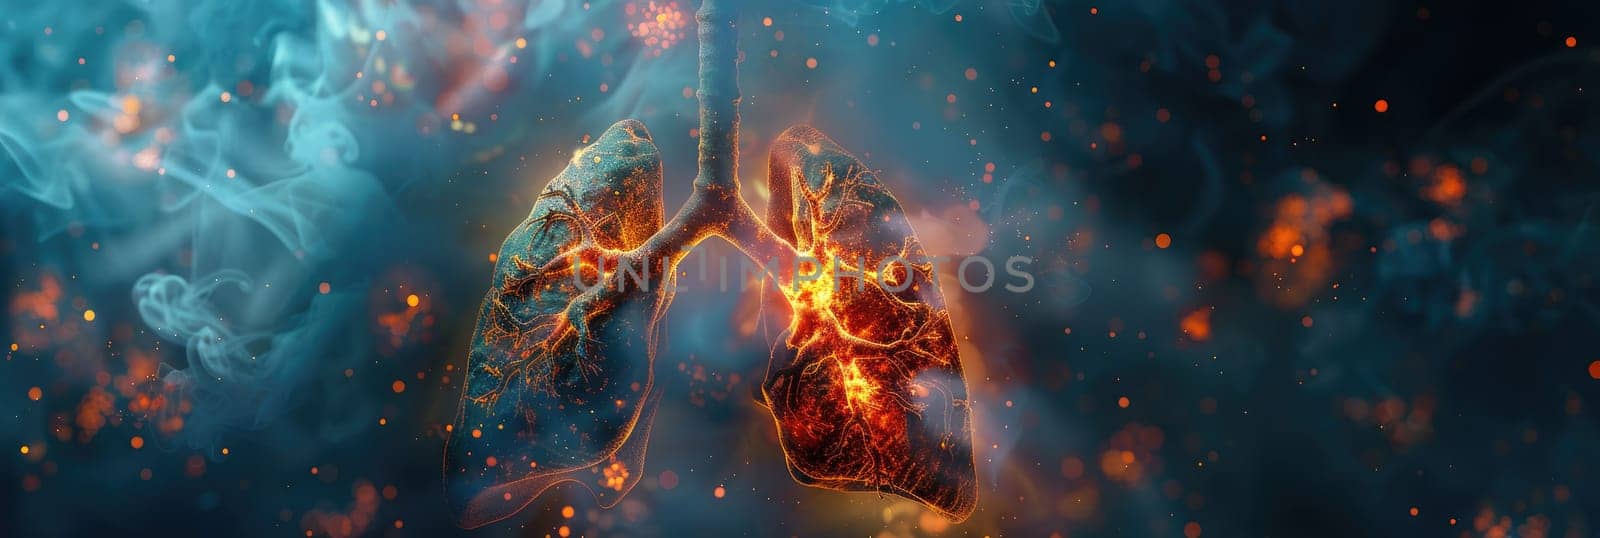 A graphic of a human lung with smoke and fire surrounding it by AI generated image.